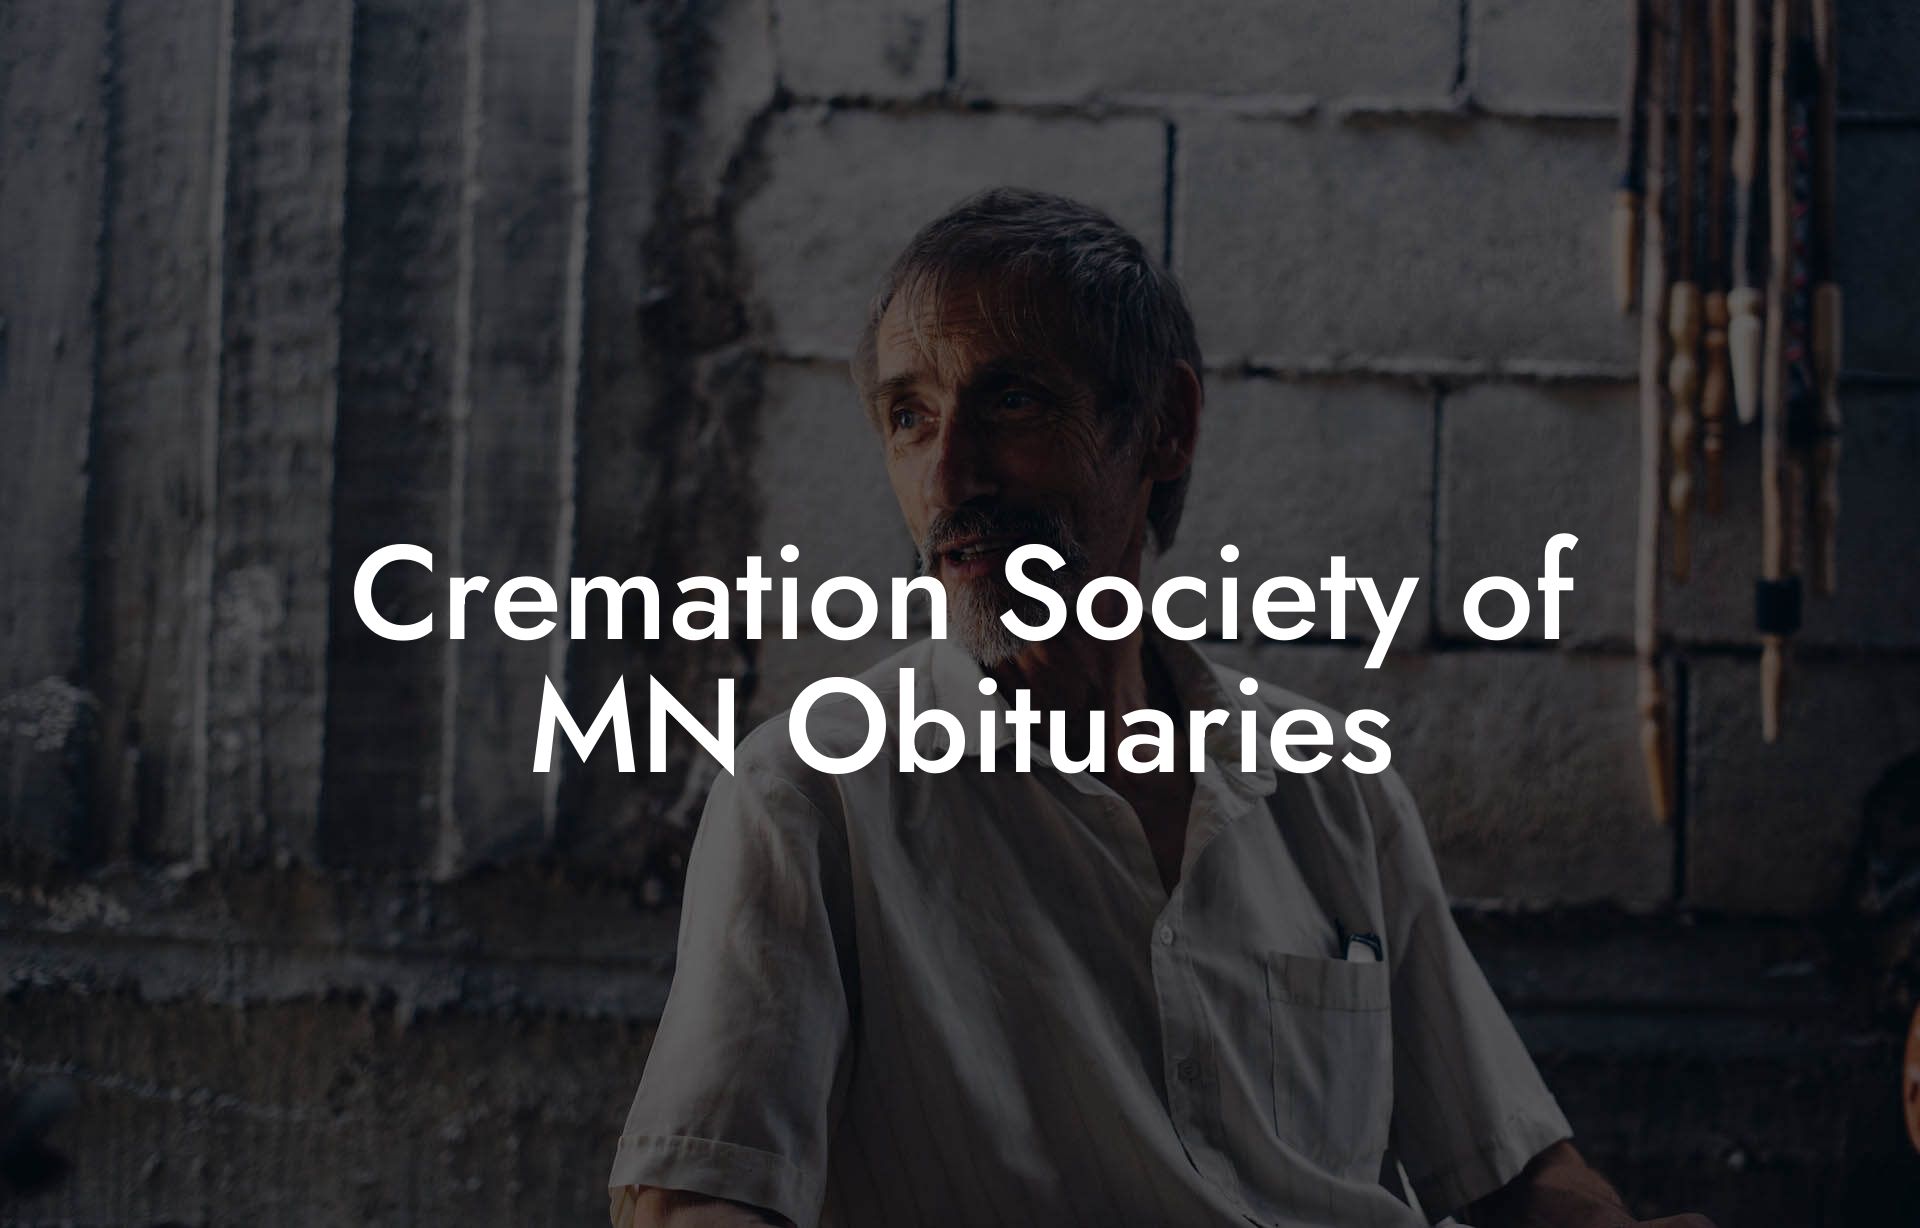 Cremation Society of MN Obituaries